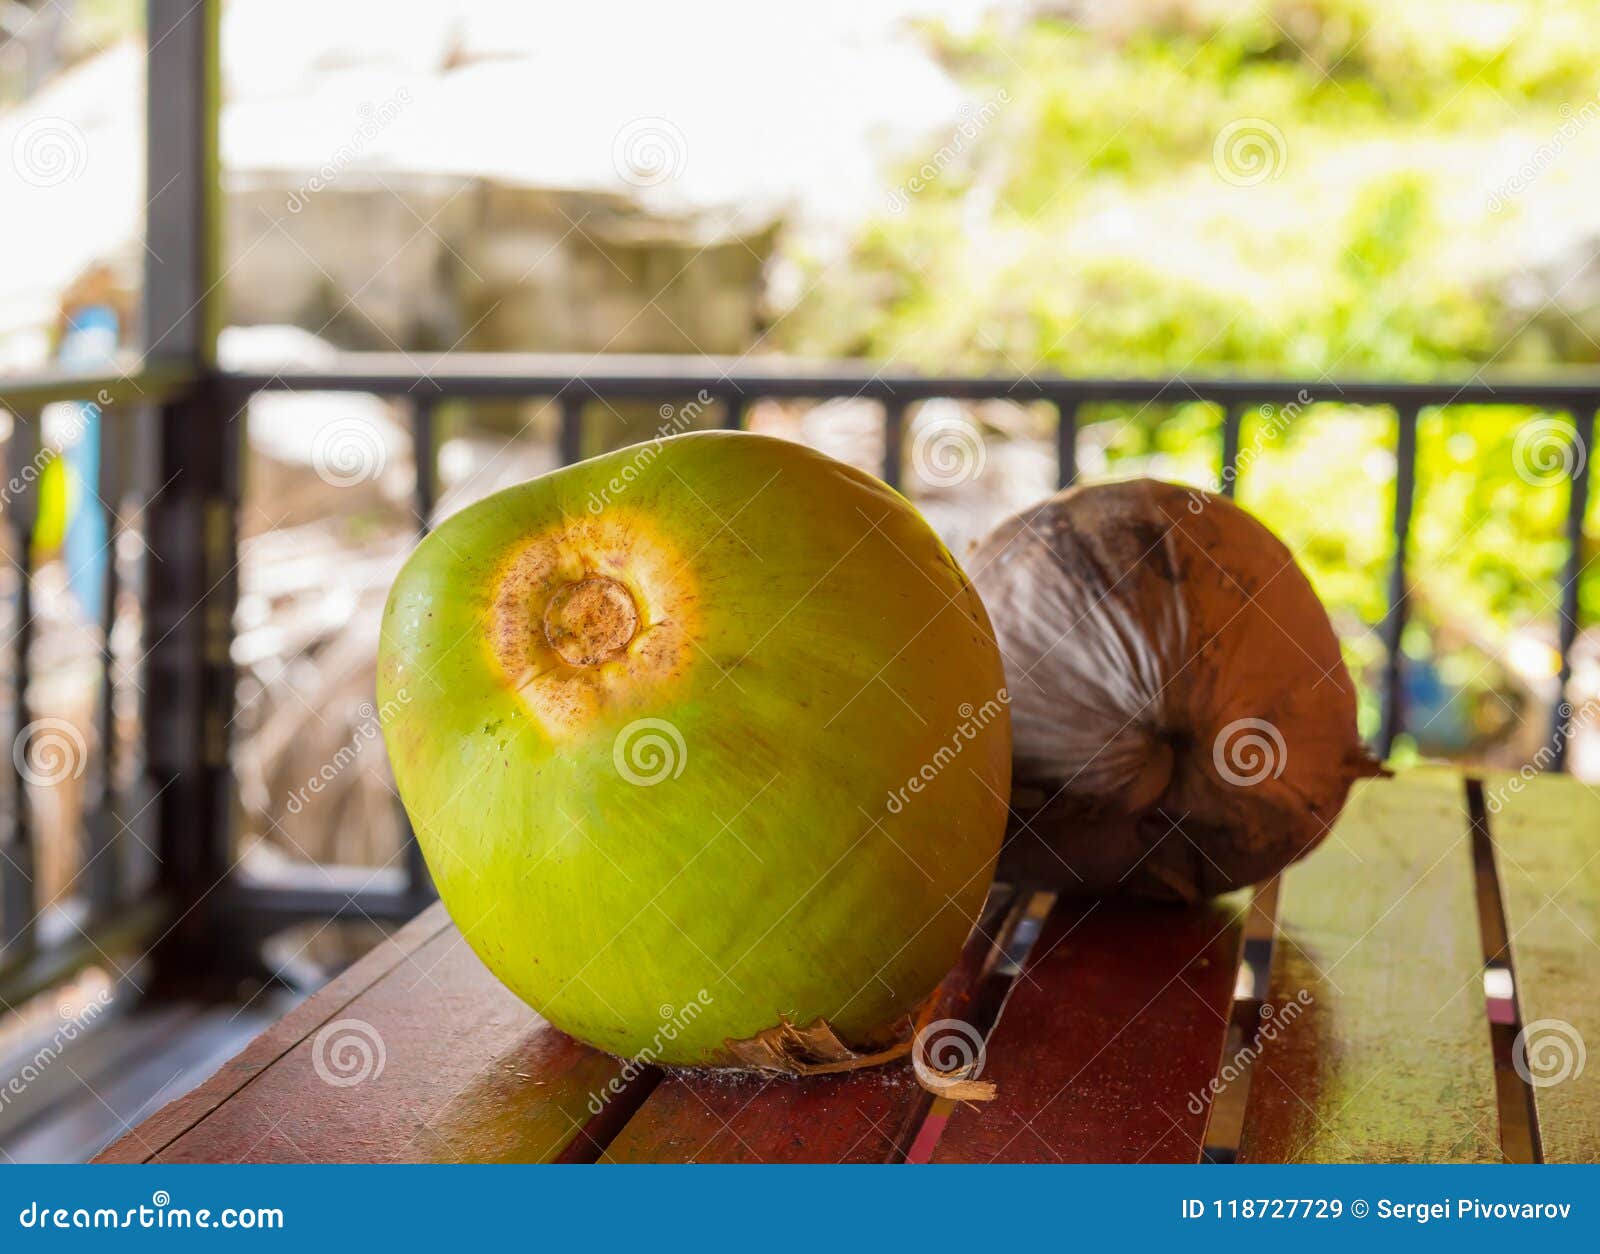 Two Coconuts Green Brown Nut Fruit on the Veranda Bungalow Table Sunny ...